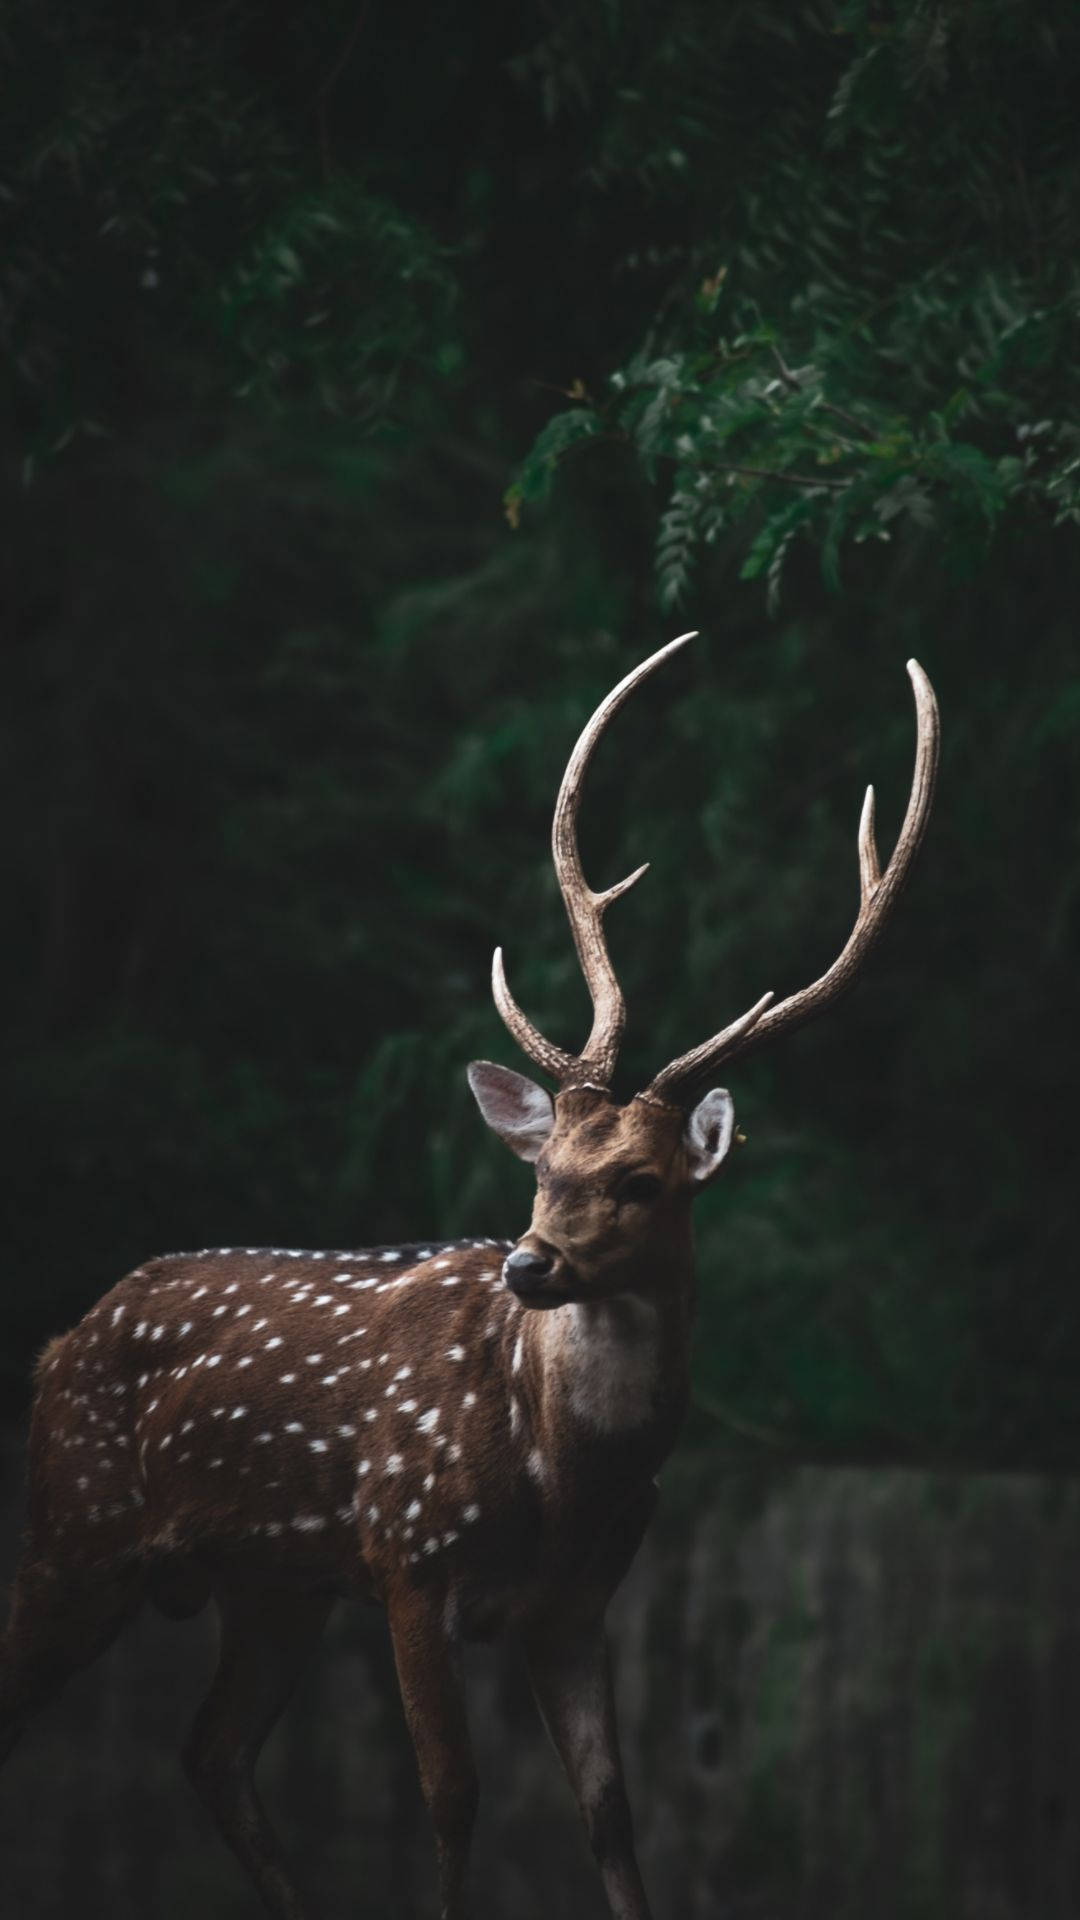 Enjoy Nature's Beauty with the Deer Iphone Wallpaper